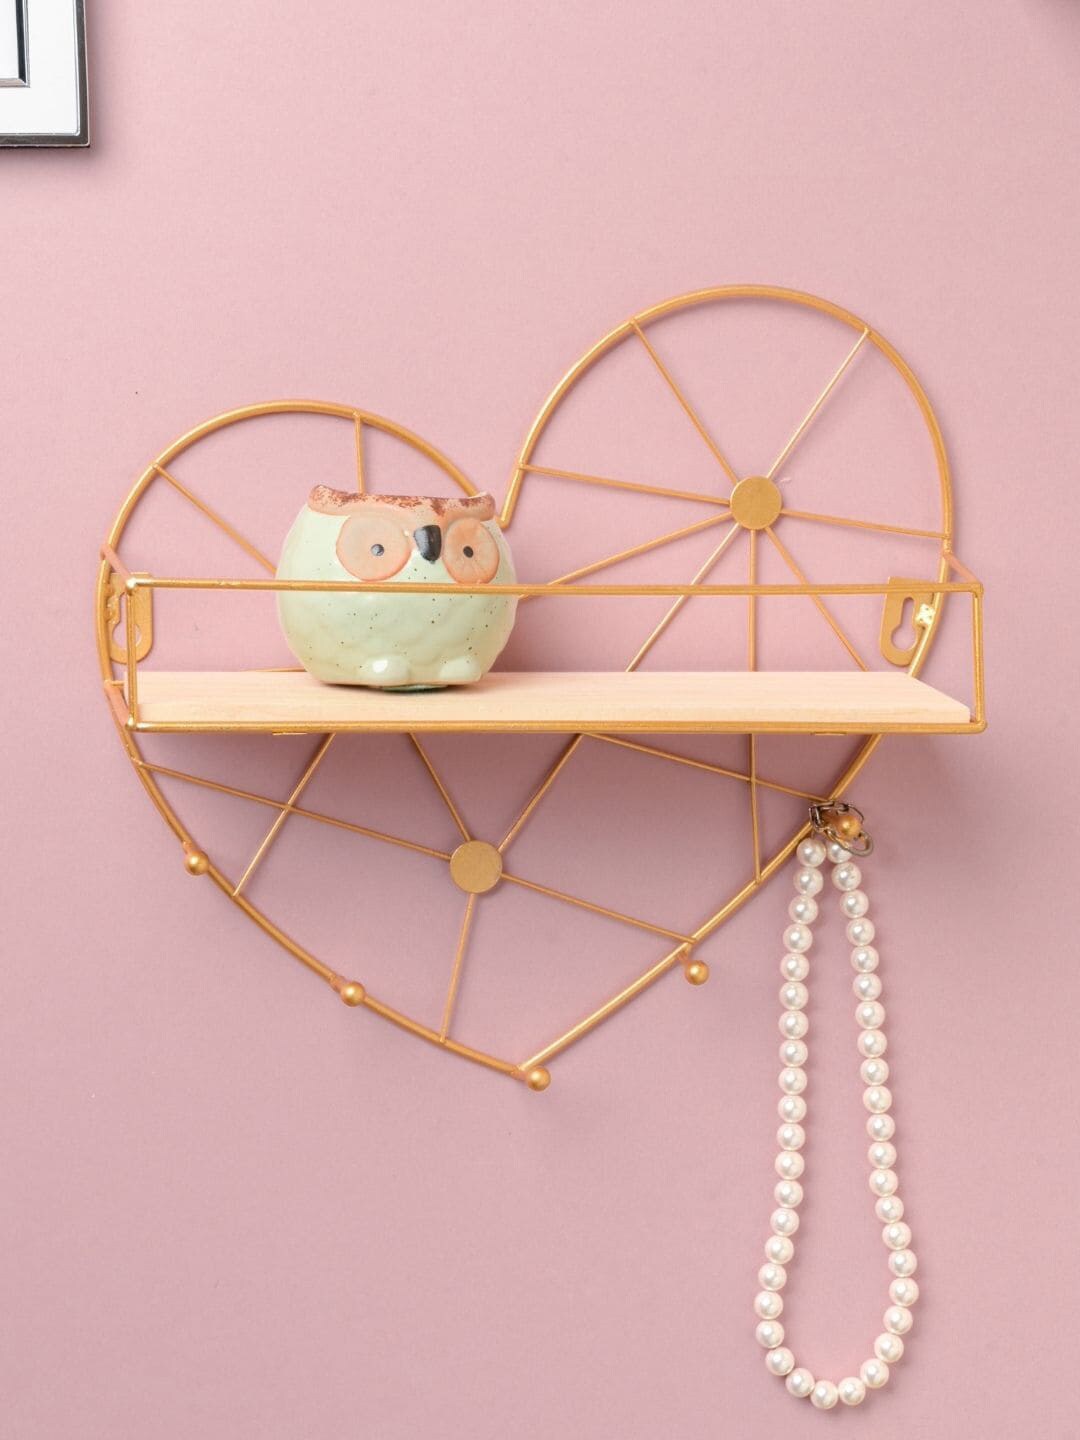 Nestasia Gold-Toned Metal Heart Wall Shelf with Keyholders Price in India